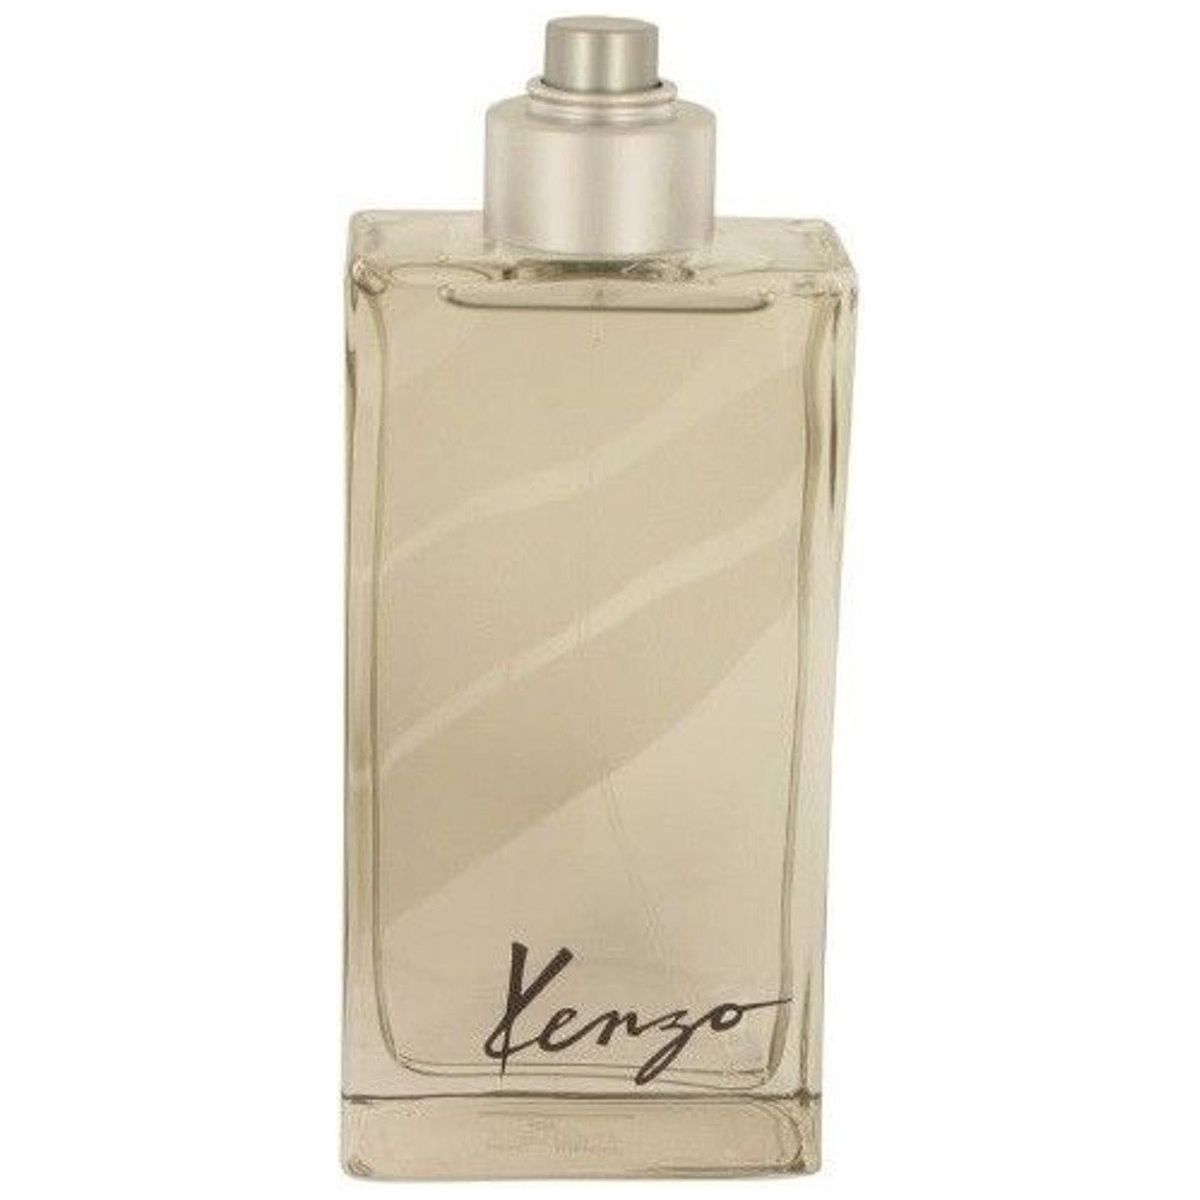 JUNGLE by Kenzo cologne 3.4 men 3.3 New / for EDT oz Tester